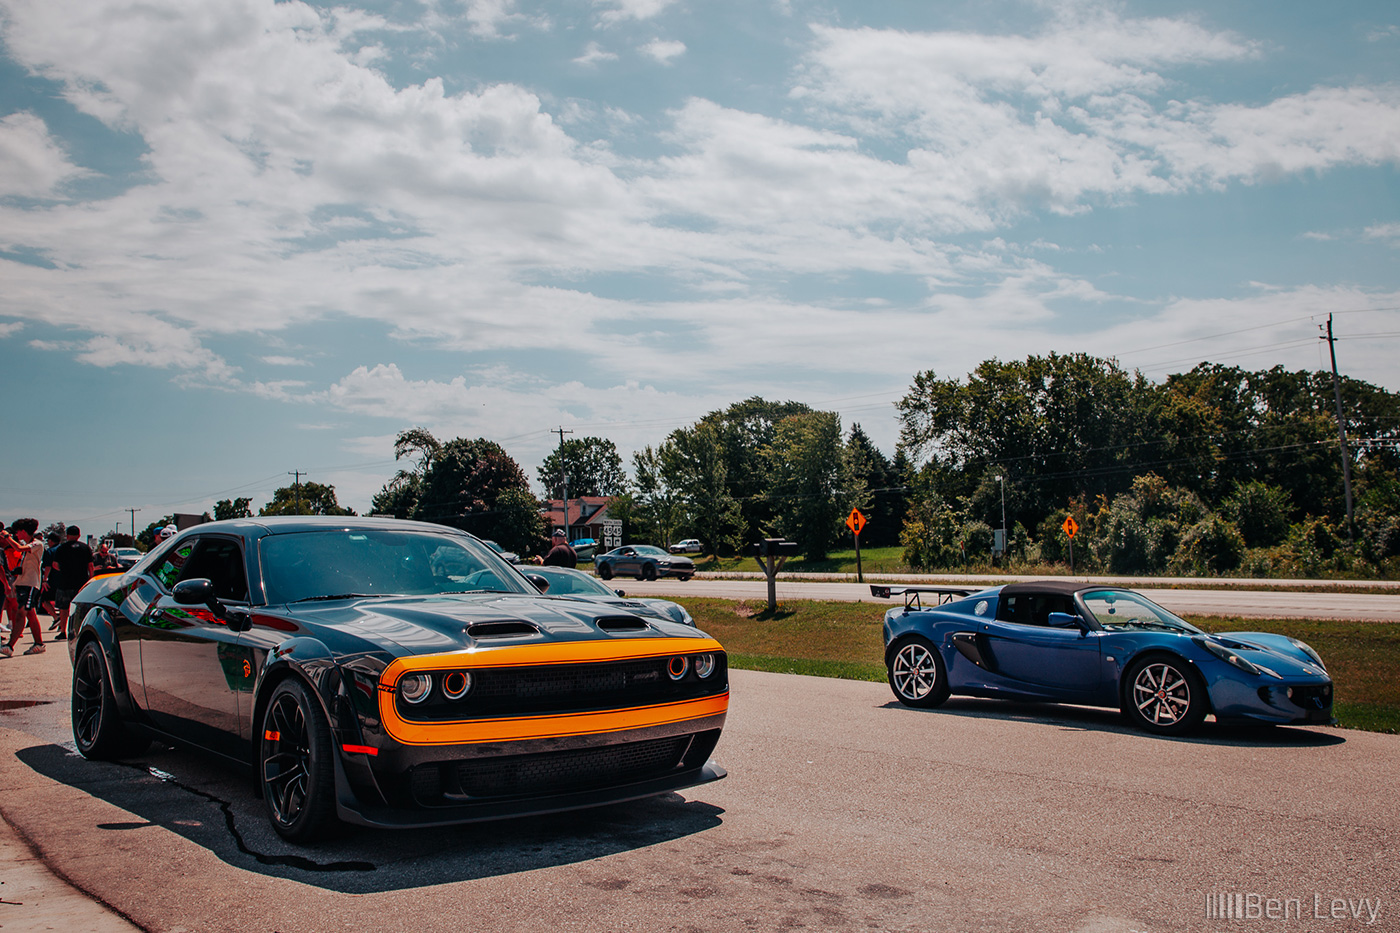 Dodge Challenger and Lotus Elise